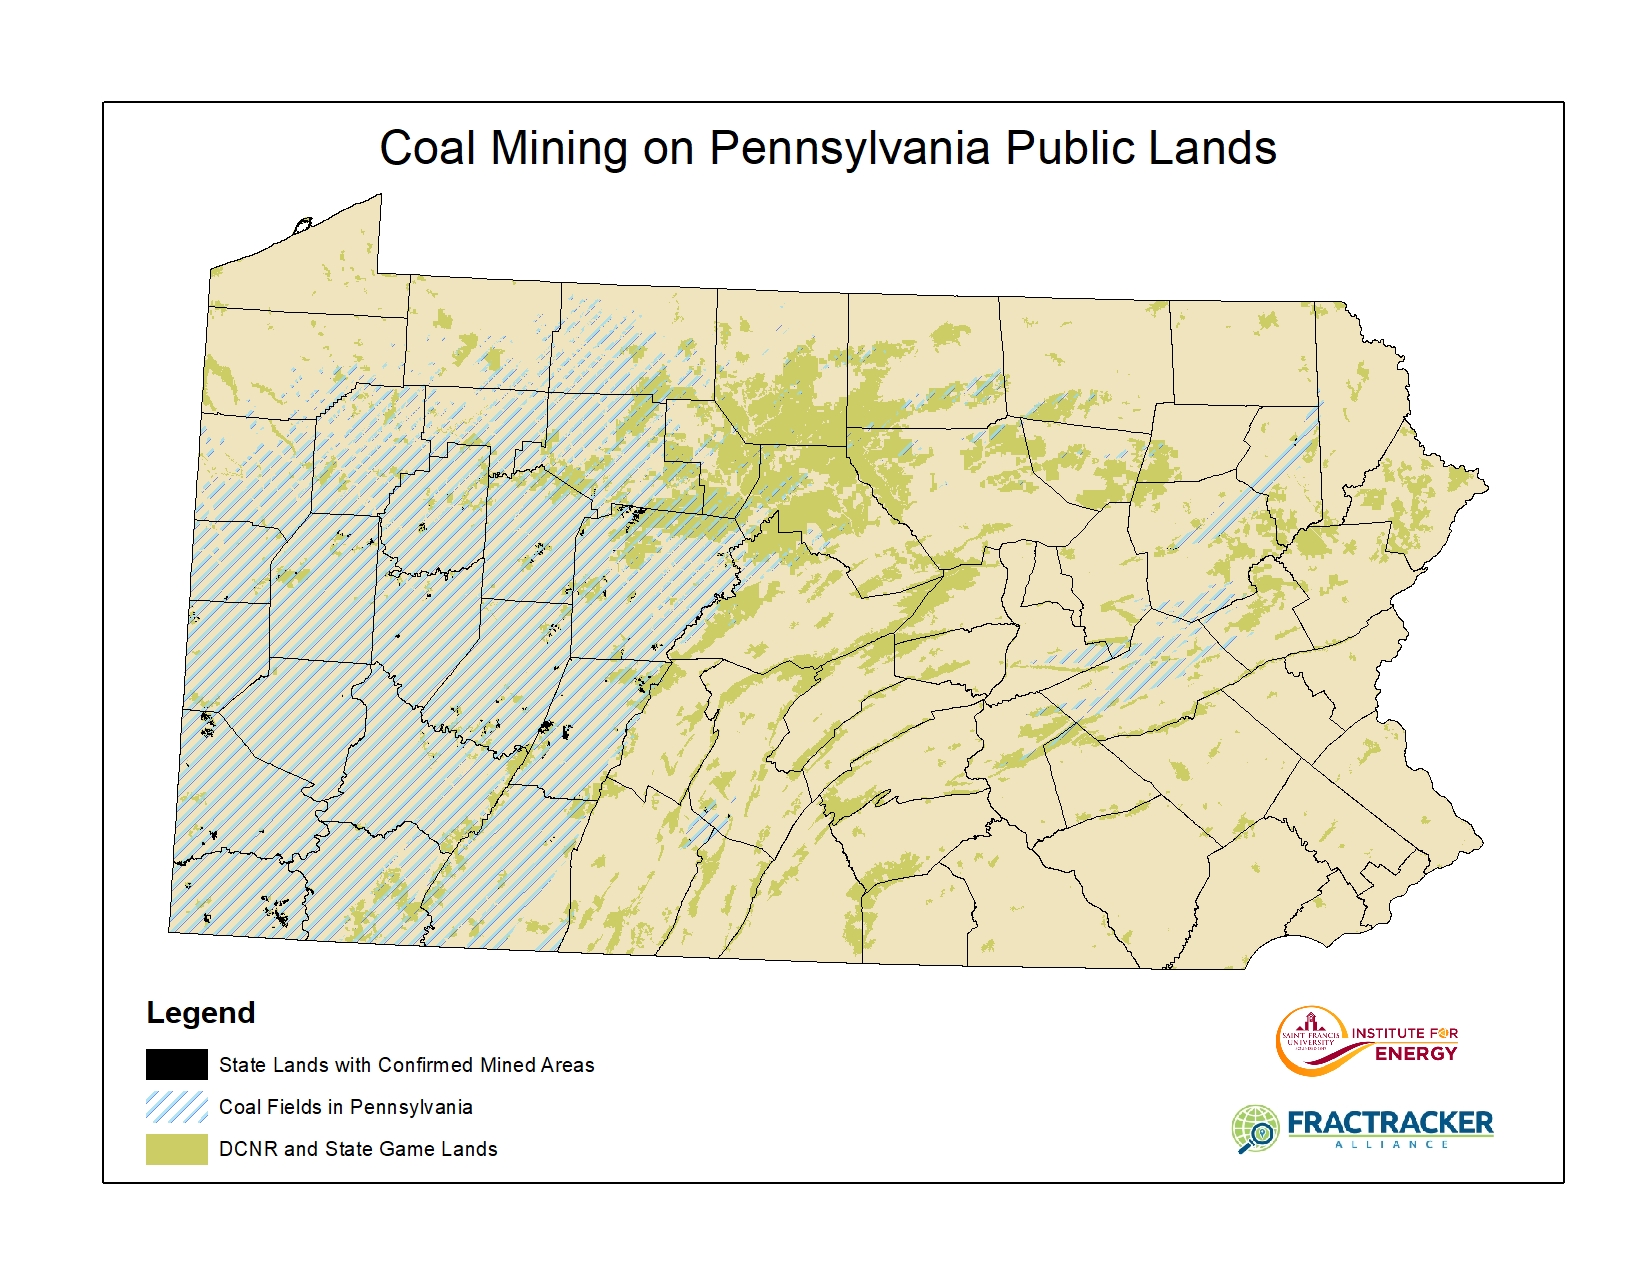 Public lands and coal mining map - PA